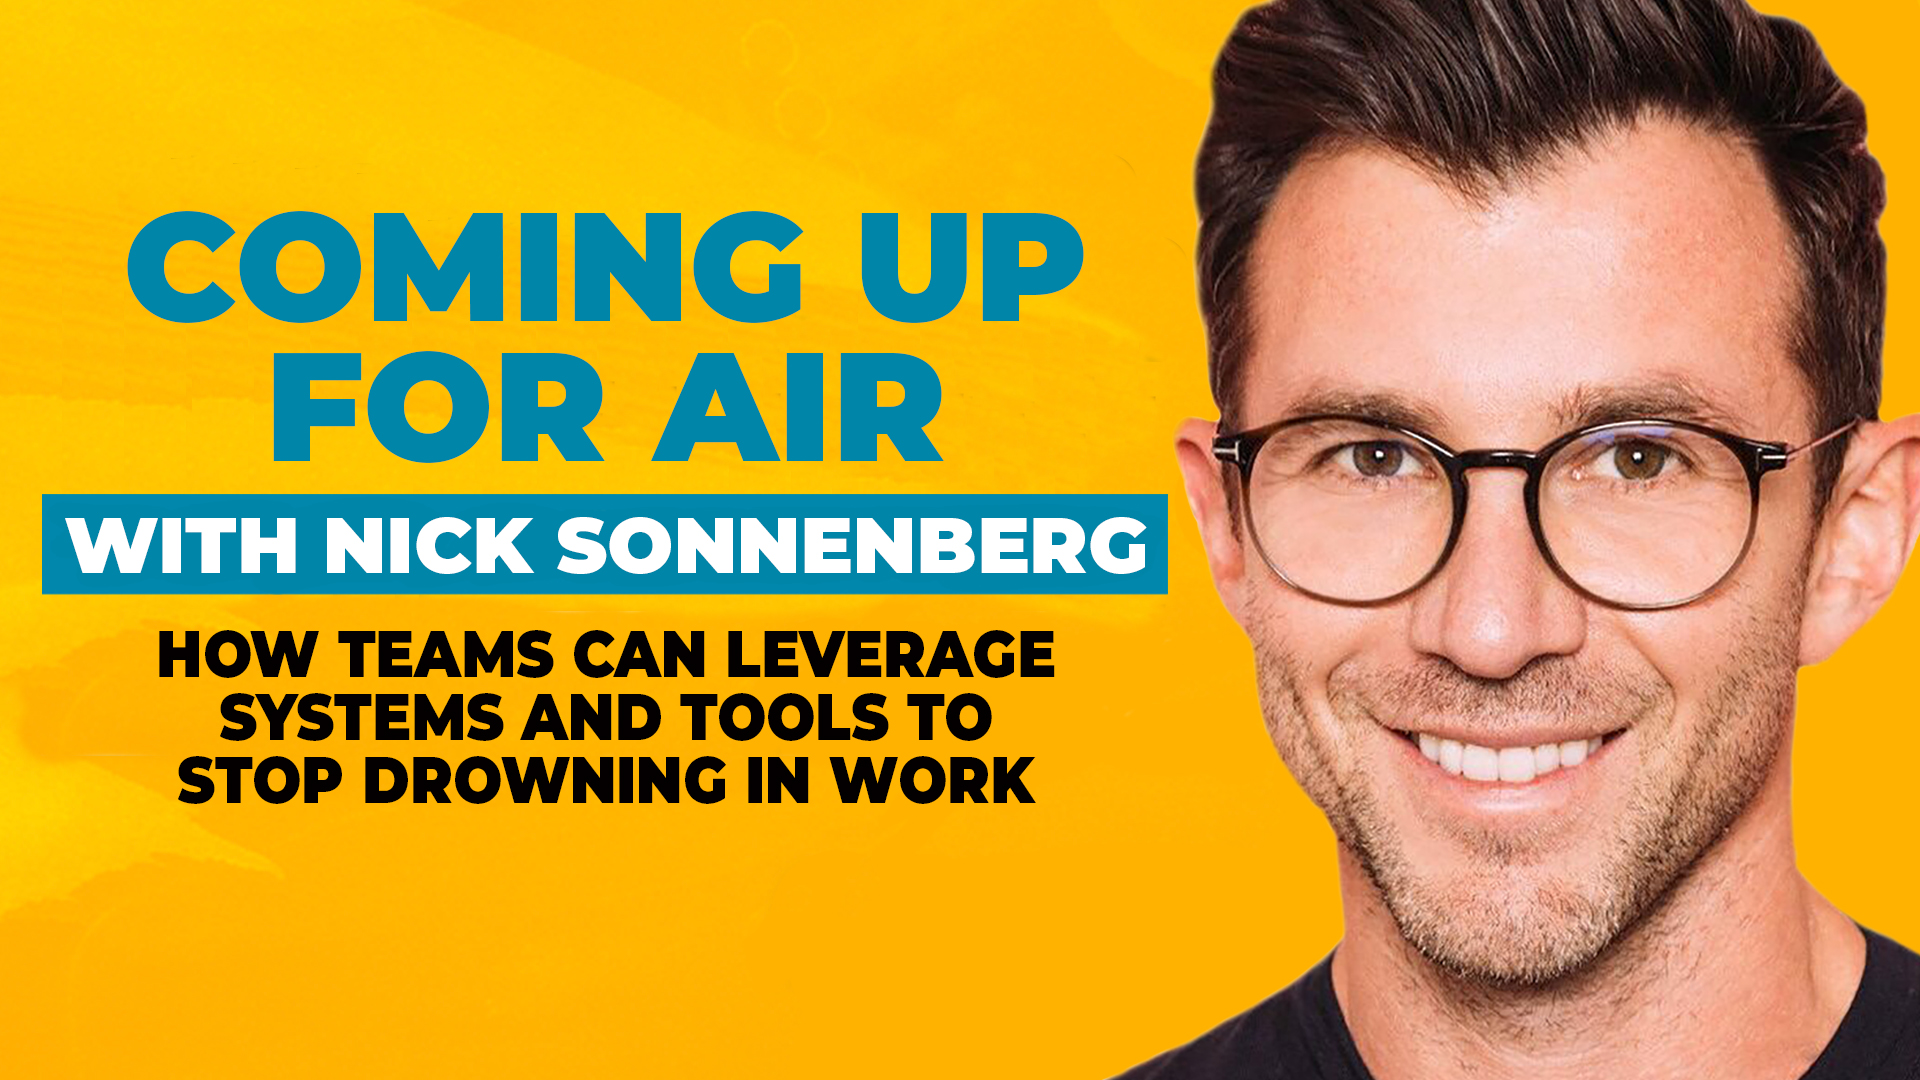 A photo of Nick Sonnenberg on a bold yellow background, along with text reading "Coming Up For Air with Nick Sonnenberg - How teams can leverage systems and tools to stop drowning in work."